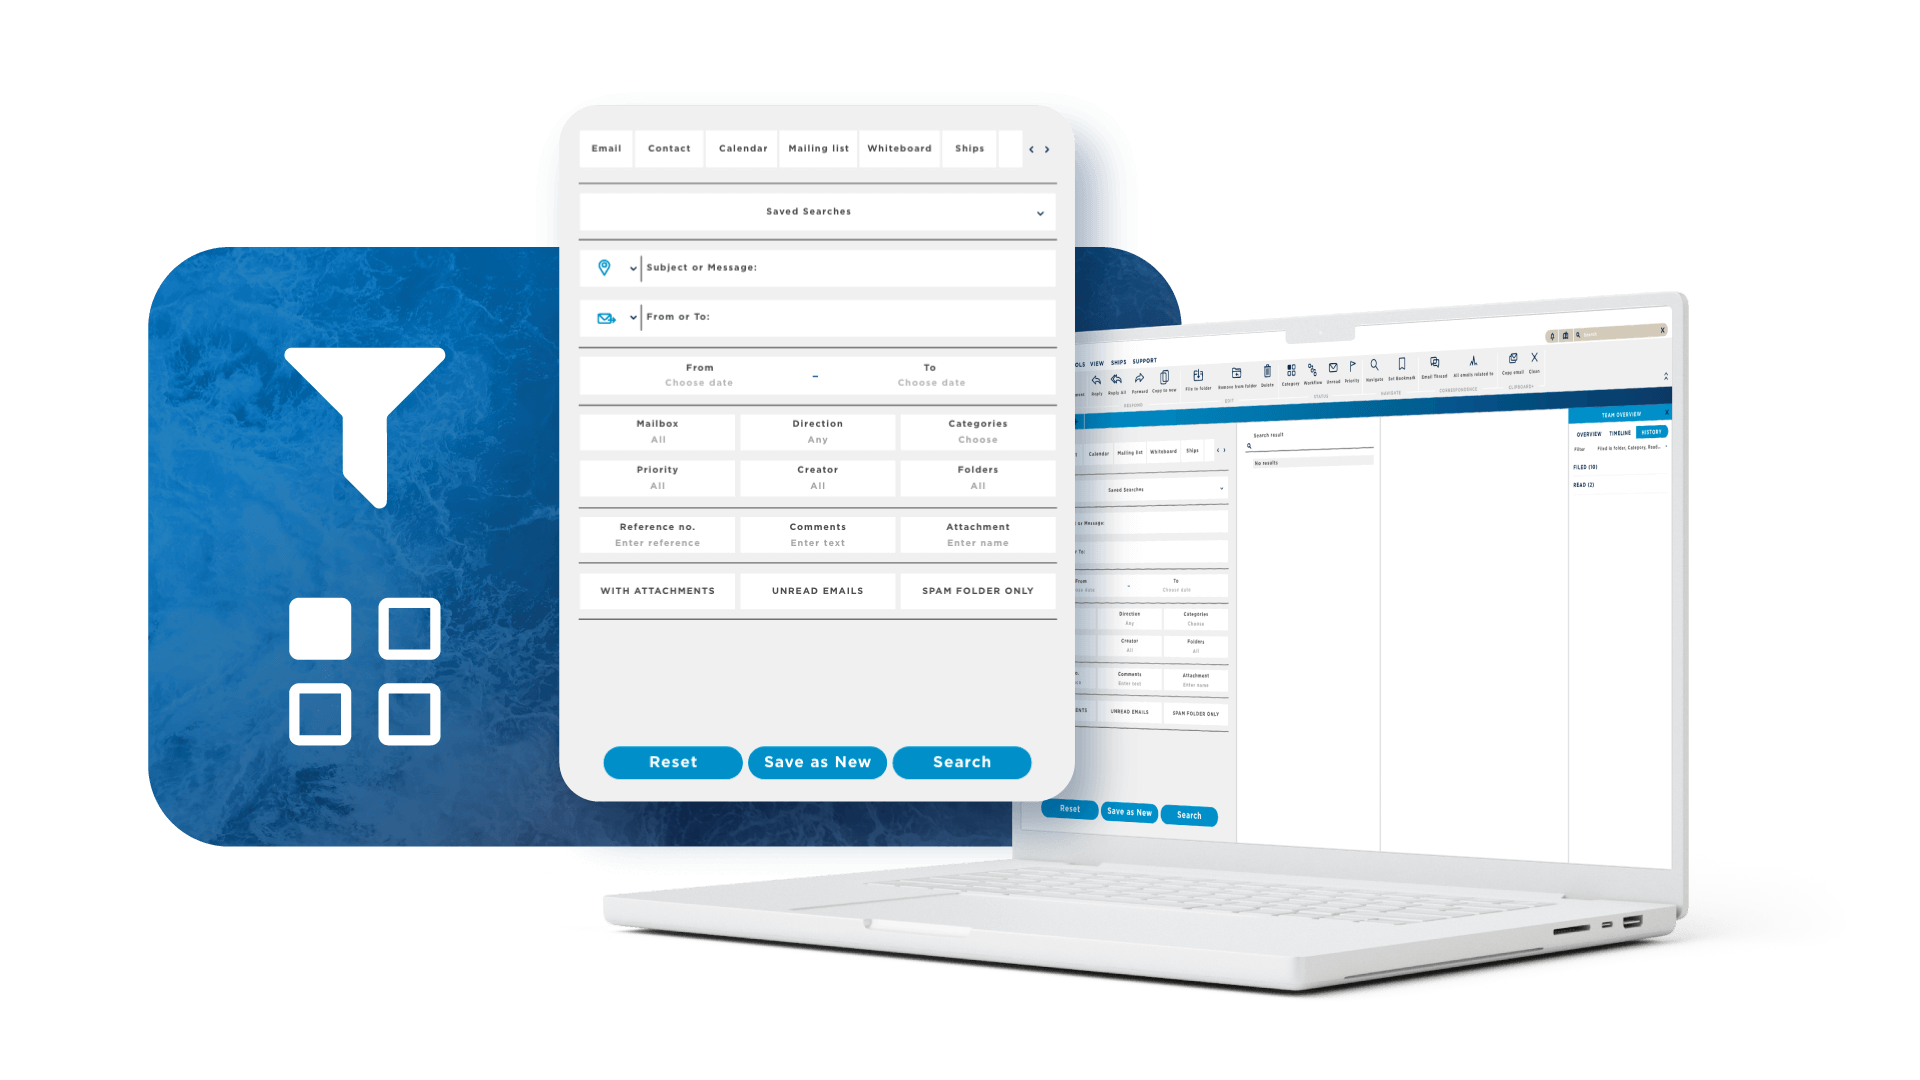 reMARK's collaborative email solution includes powerful email filters and categories so users can easily manage high volumes of emails